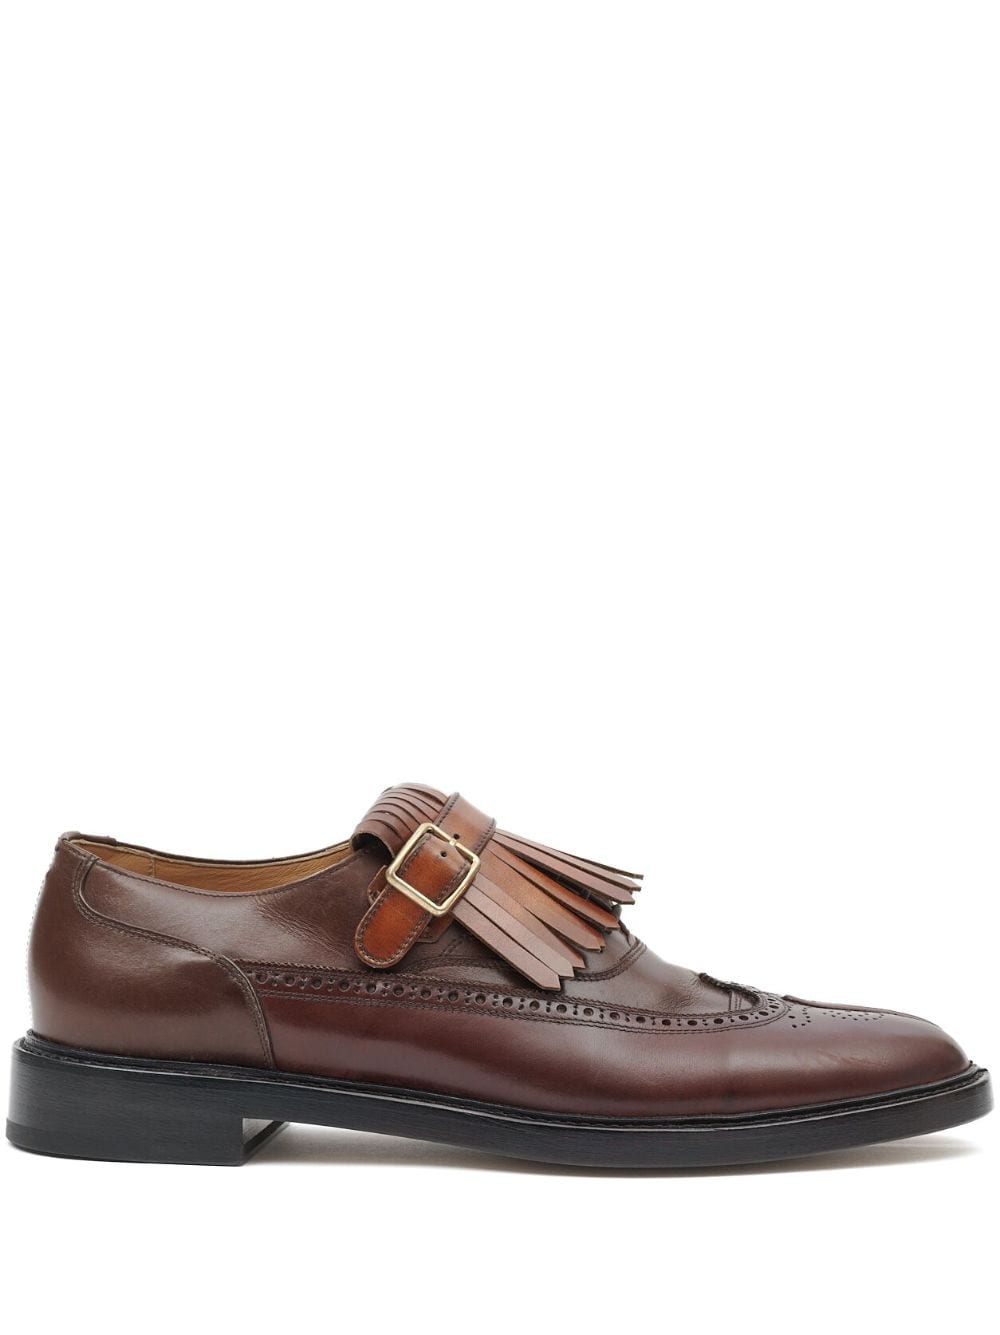 Maison Margiela Tabi Monster Fringed Leather Brogues In Brown